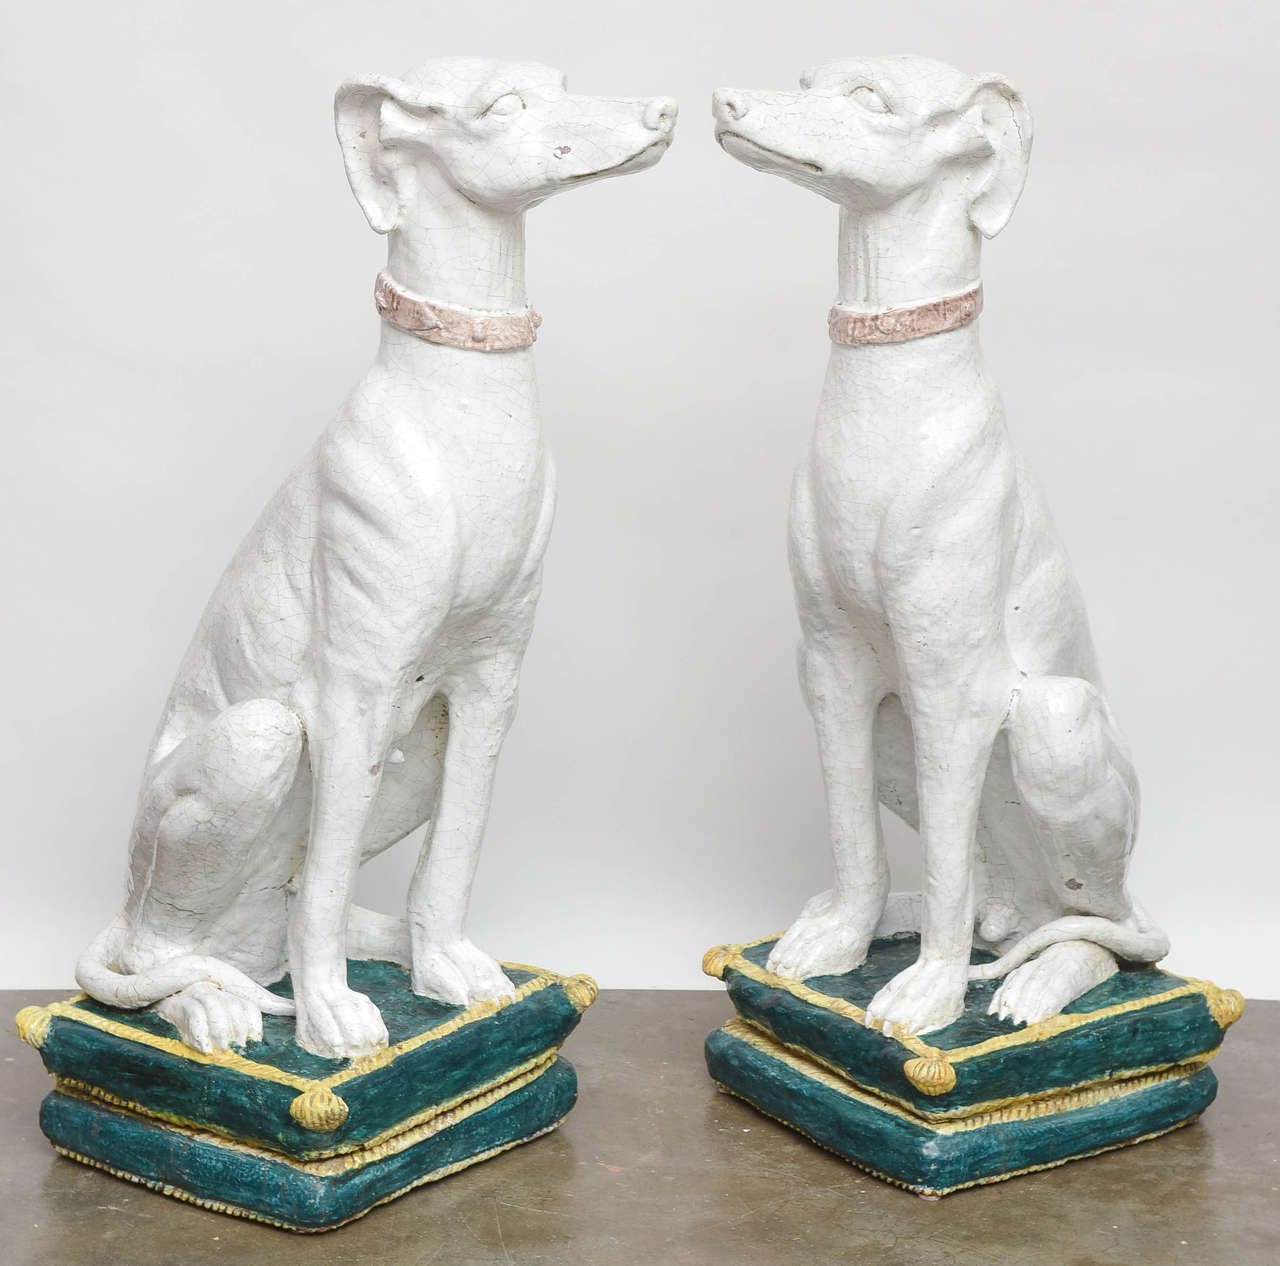 Pair of French monumental glazed terracotta male & female greyhounds sitting on tasseled pillows. Exceptional size and detail with wonderful crazing.